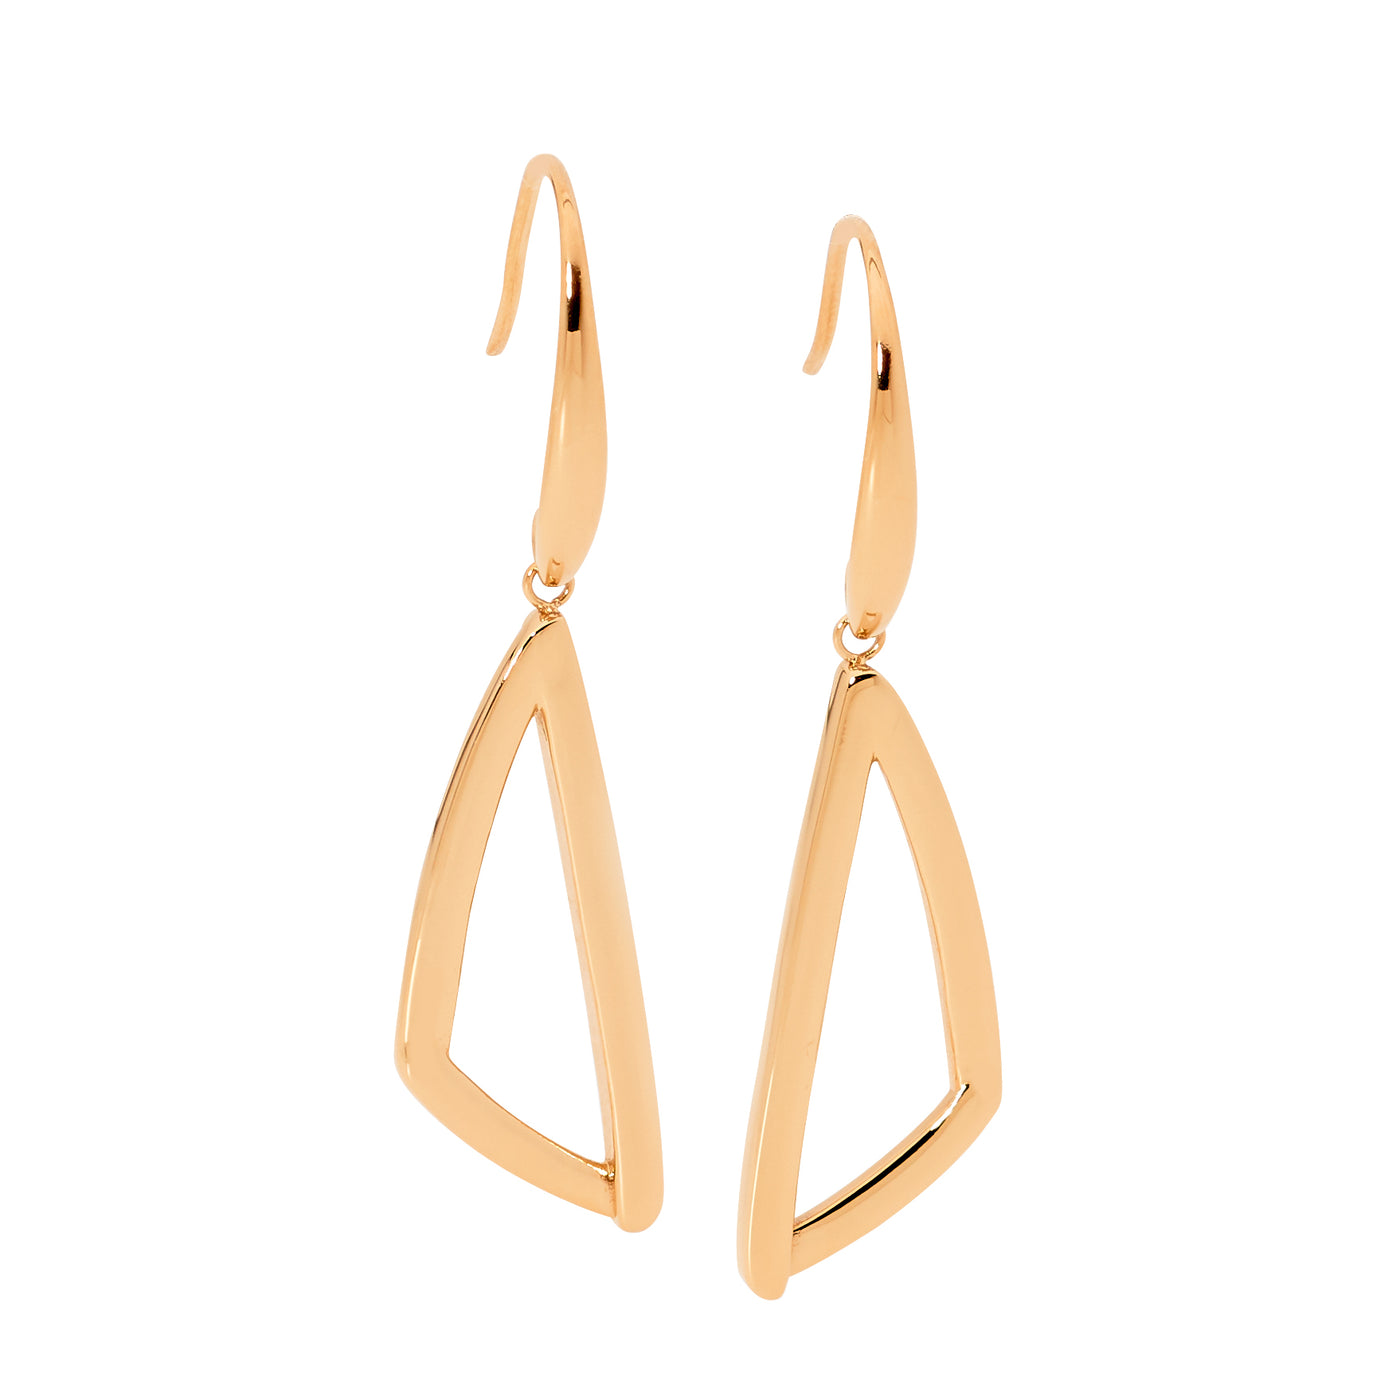 Stainless steel rose gold plated 29mm open triangle earrings w/shp hook